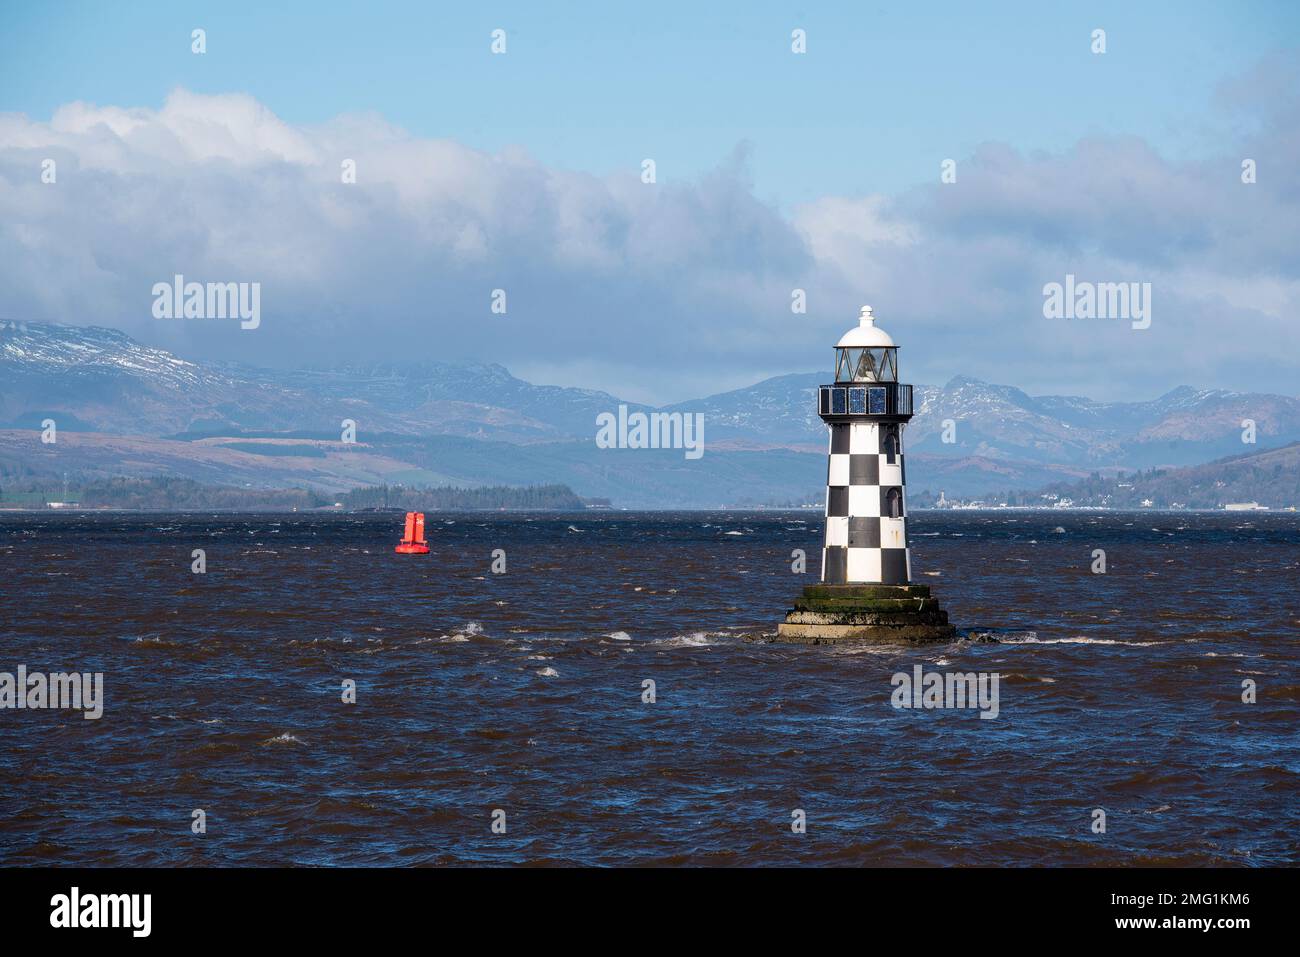 The Perch Lighthouse at Port Glasgow, on the Firth of Clyde. Stock Photo